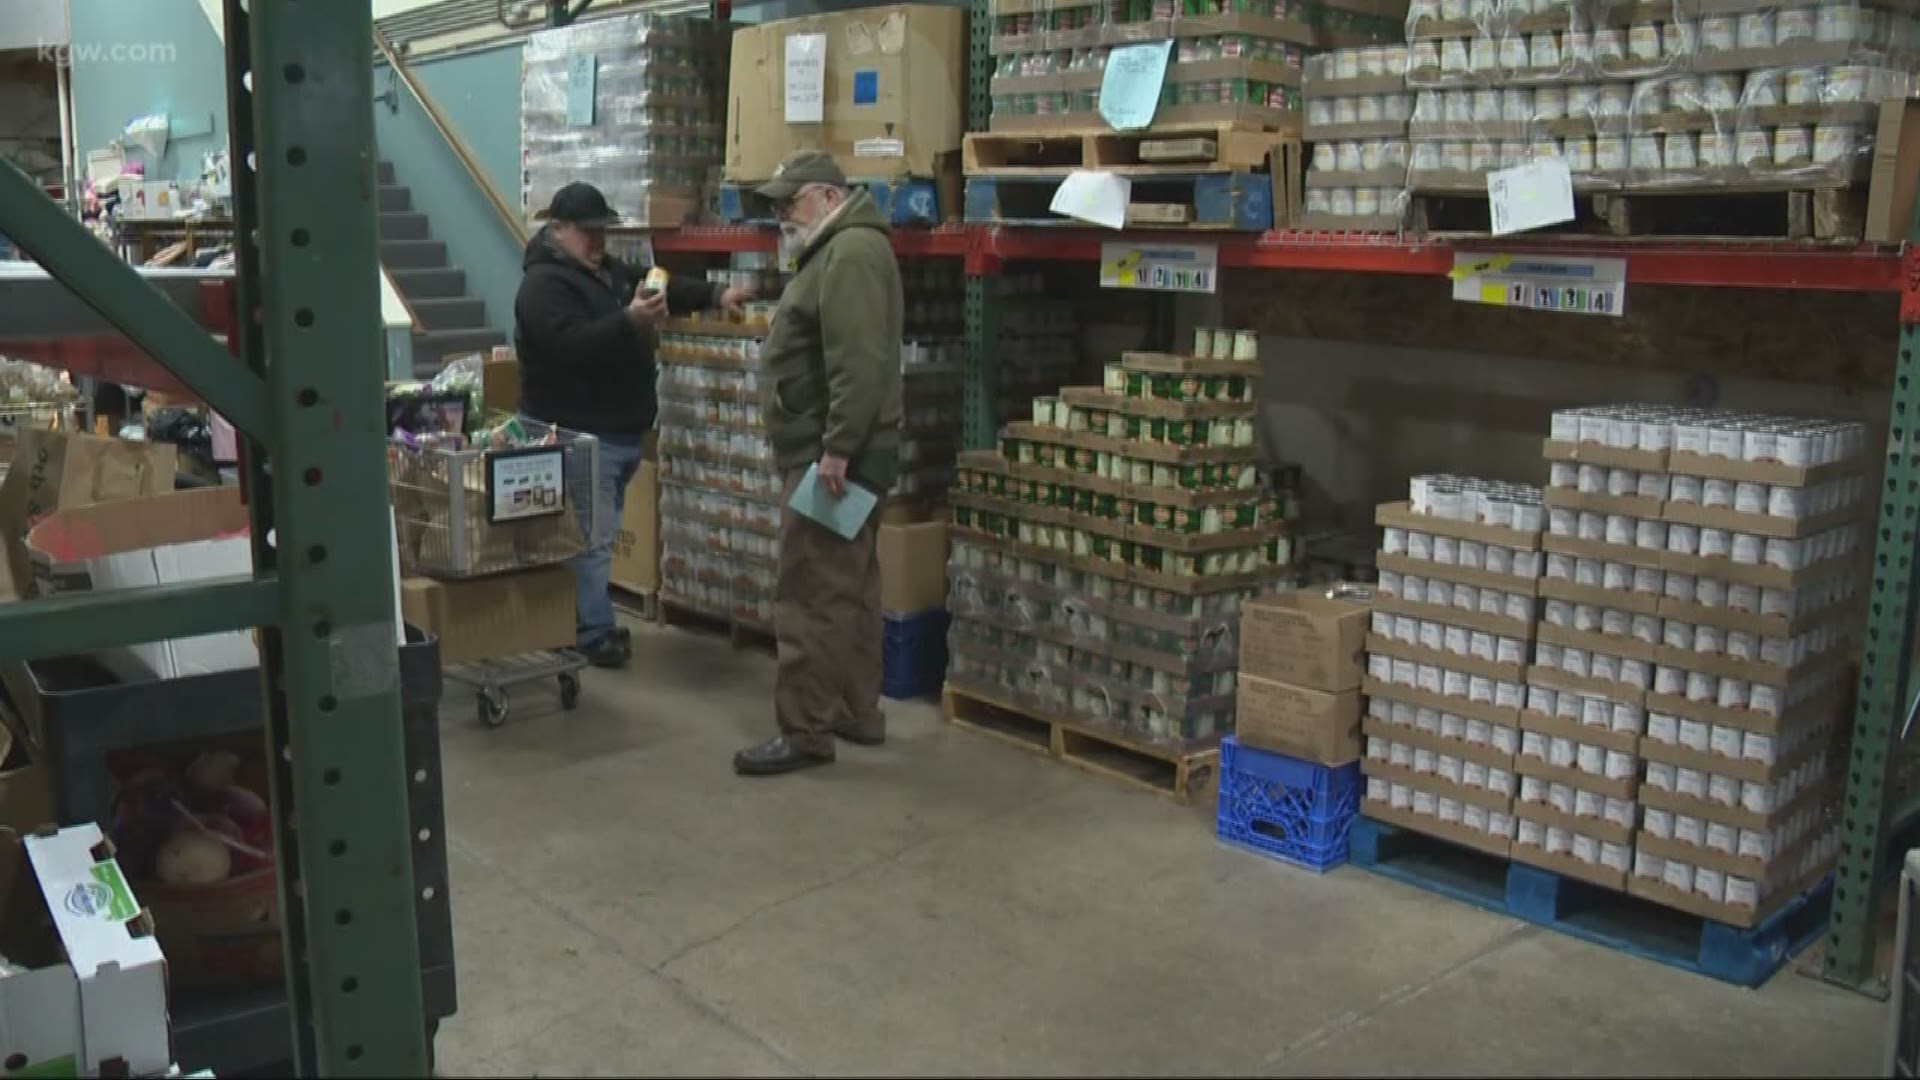 The Oregon Food Bank wants to take on more thing off your plate during the coronavirus pandemic. KGW's Jon Goodwin explains.